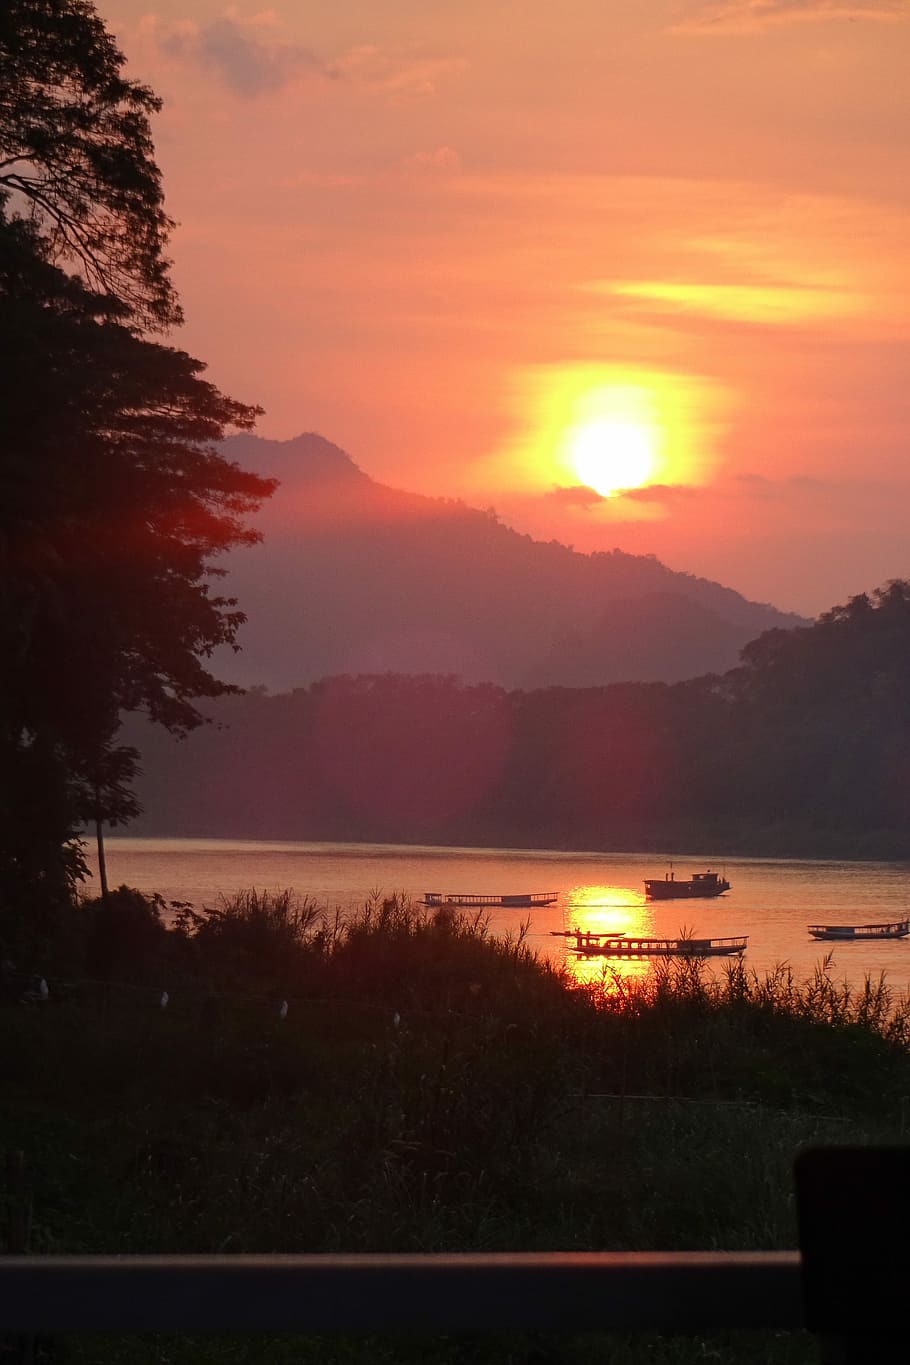 Laos, Luang Prabang, Mekong River, landscape, sunset, scenics, reflection, tranquil scene, beauty in nature, silhouette